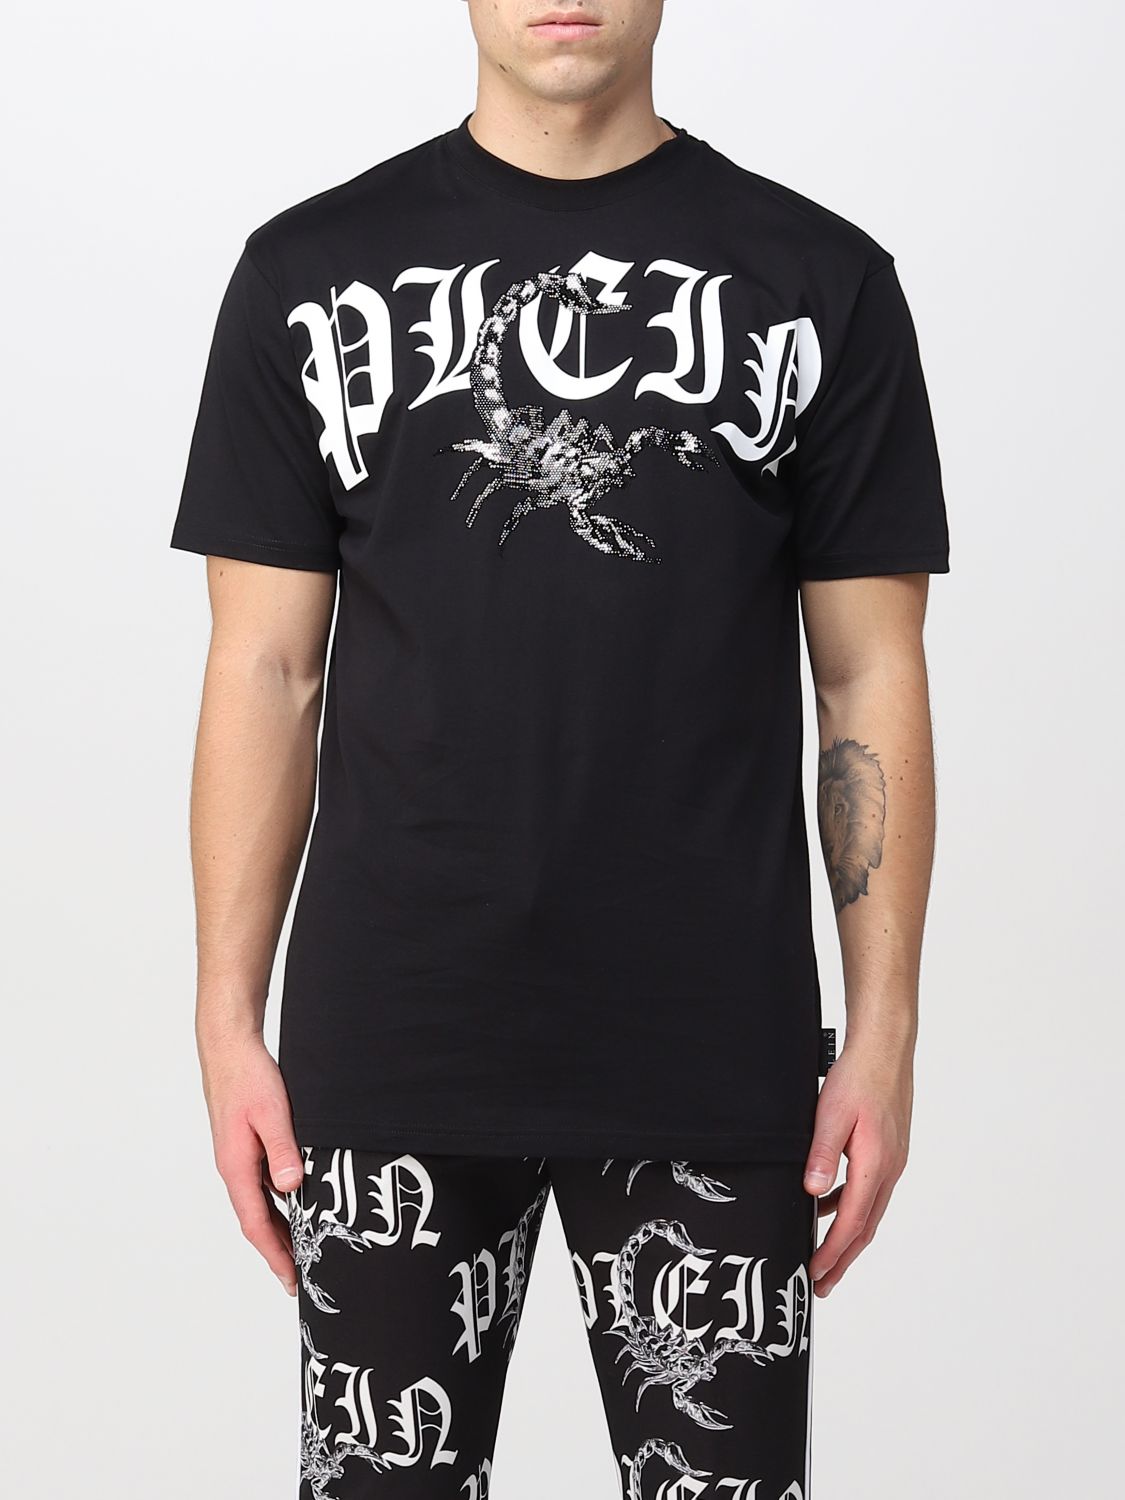 roem Rijk Tijd Philipp Plein Outlet: t-shirt for man - Black | Philipp Plein t-shirt  FABCMTK5652PJY002N online on GIGLIO.COM